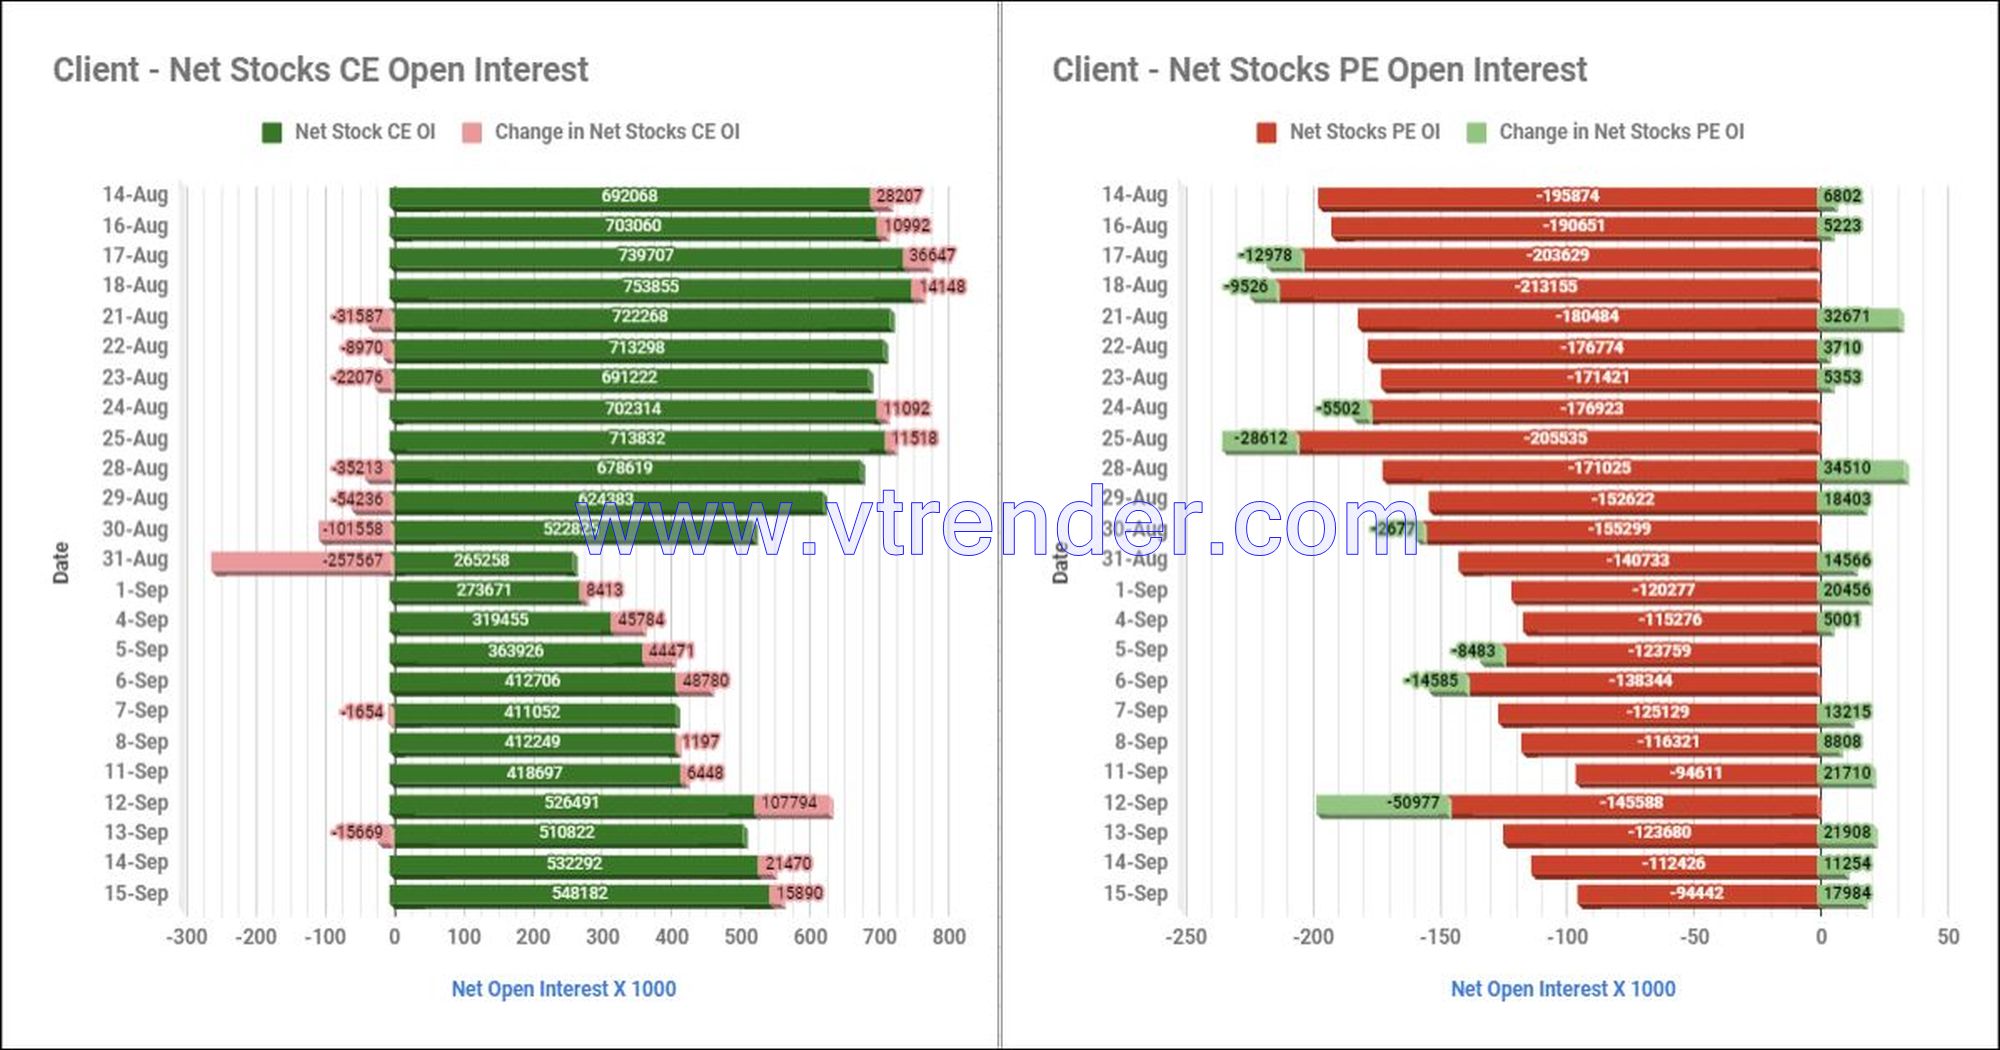 Clientstop15Sep Participantwise Net Open Interest And Net Equity Investments – 15Th Sep 2023 Ce, Client, Dii, Fii, Index Futures, Index Options, Open Interest, Pe, Prop, Stocks Futures